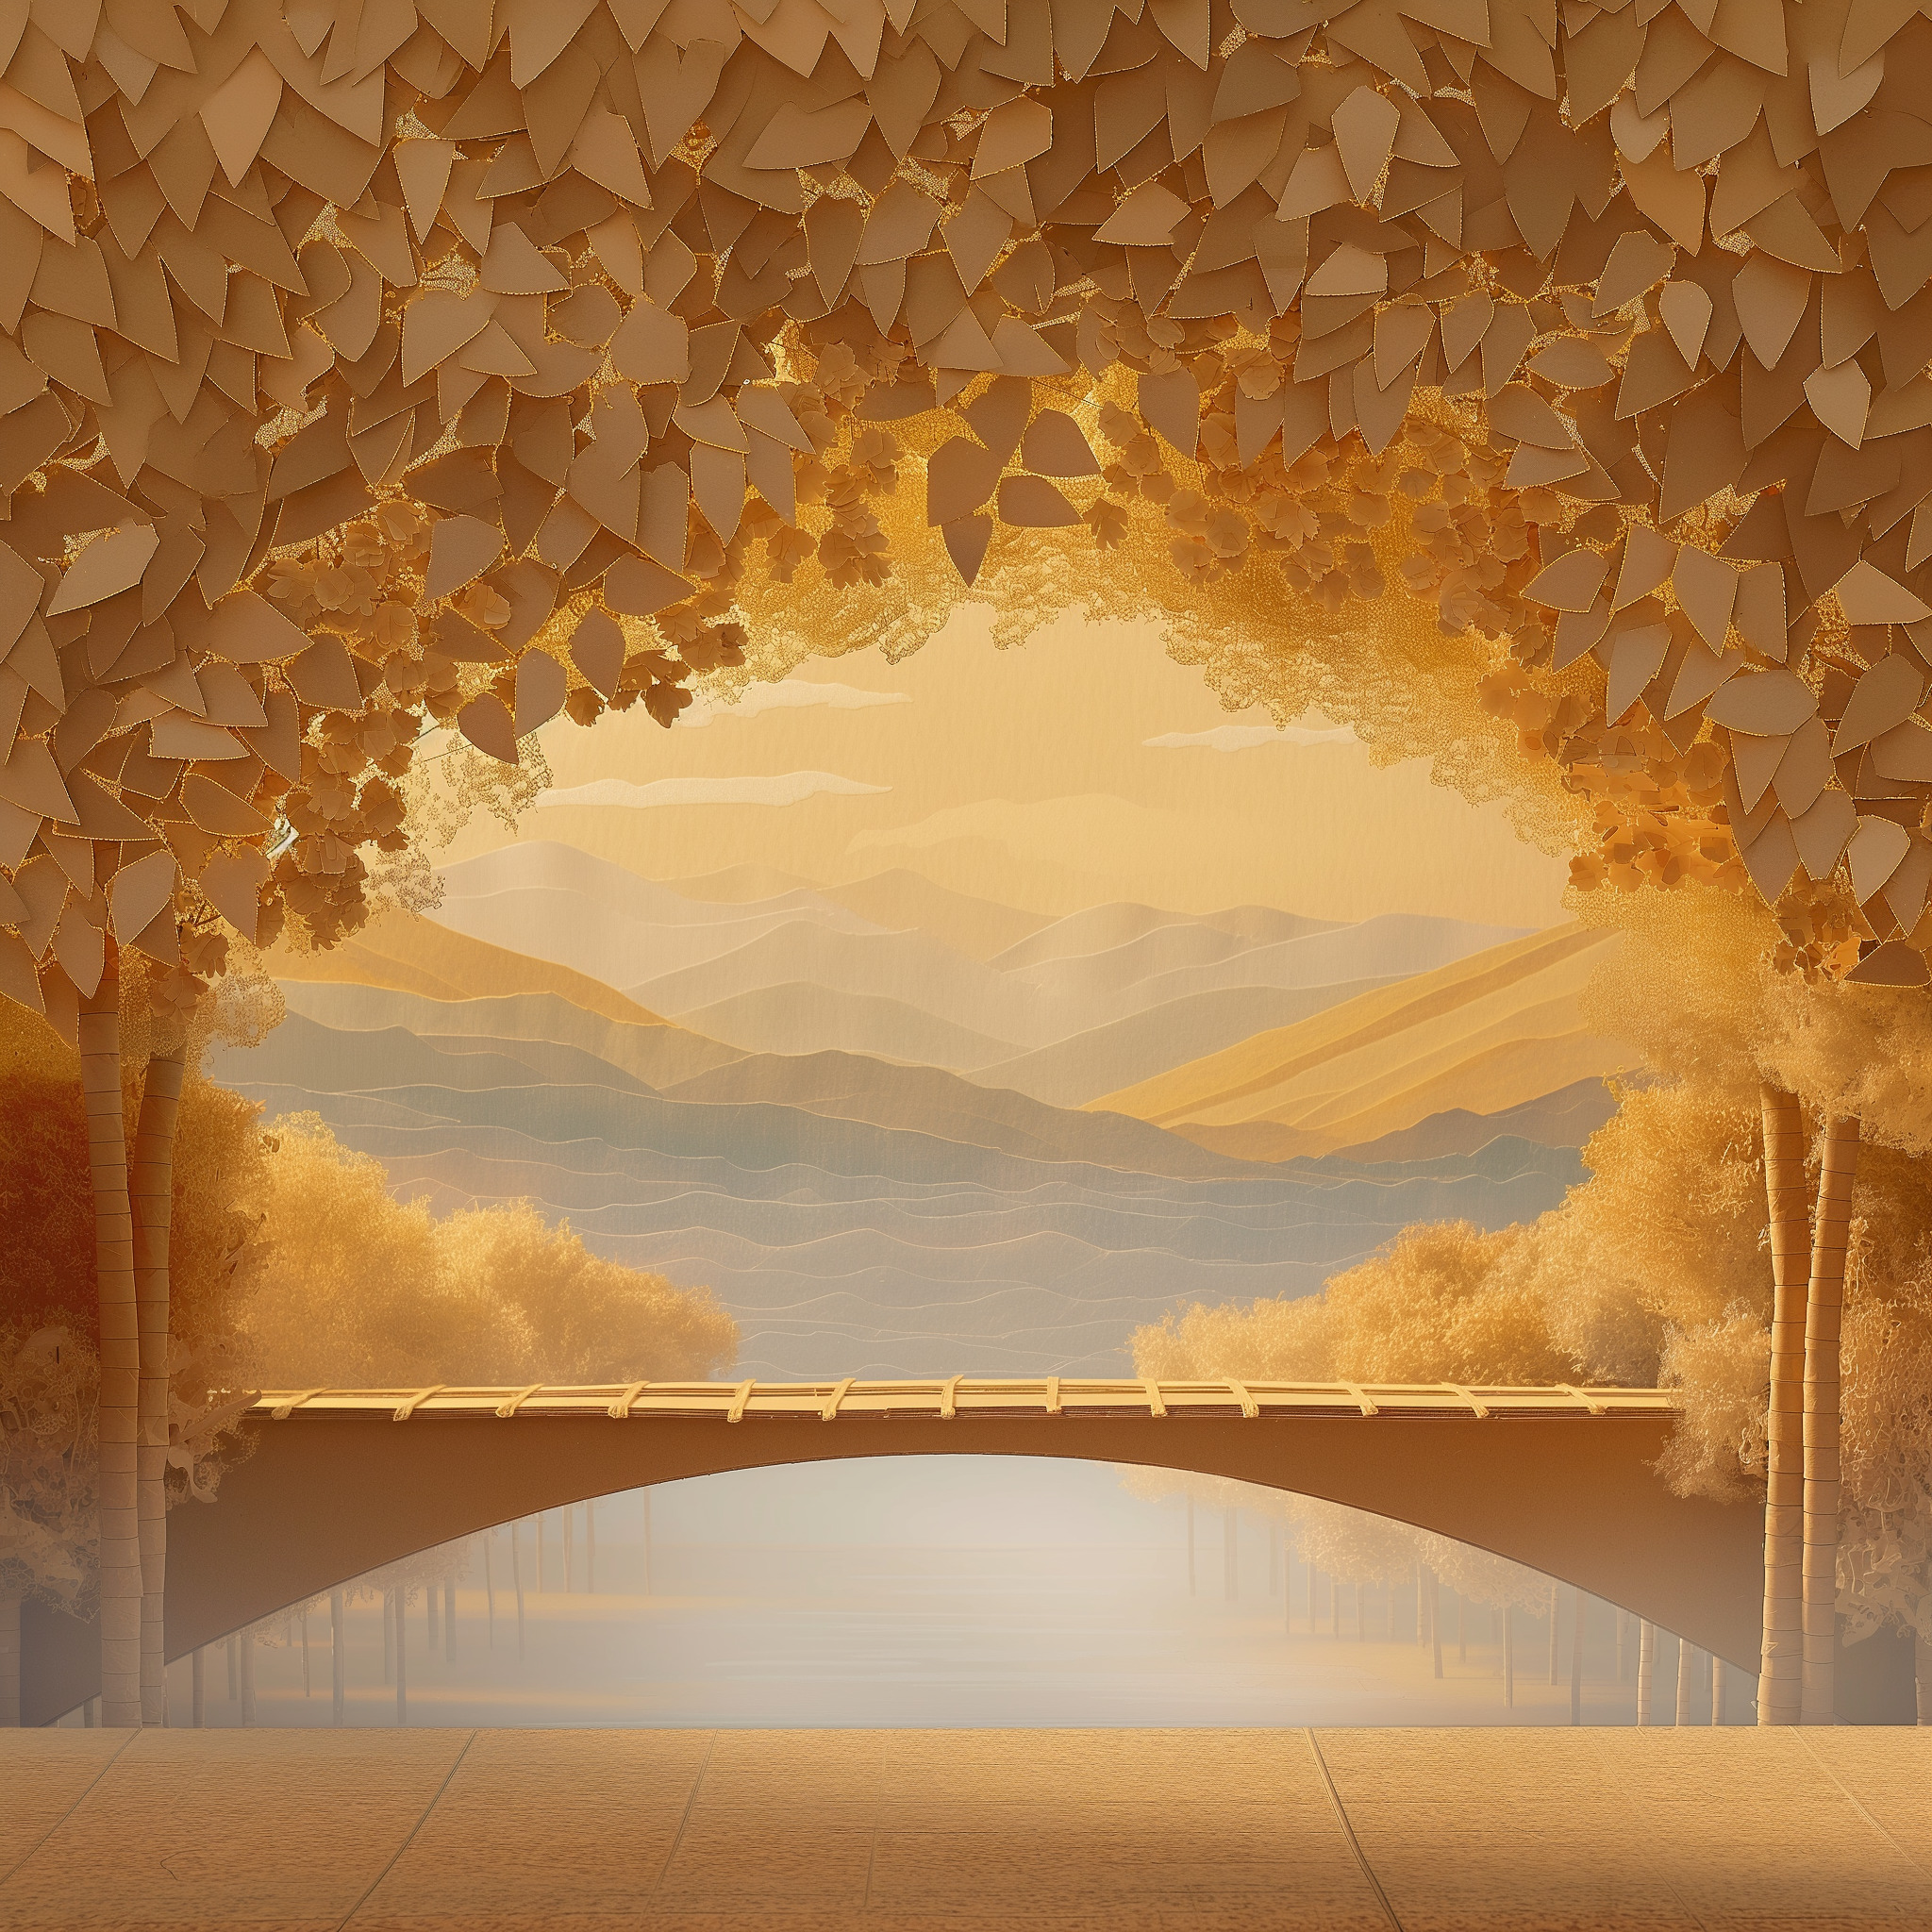 Children’s Book Backgrounds: Autumn Collection